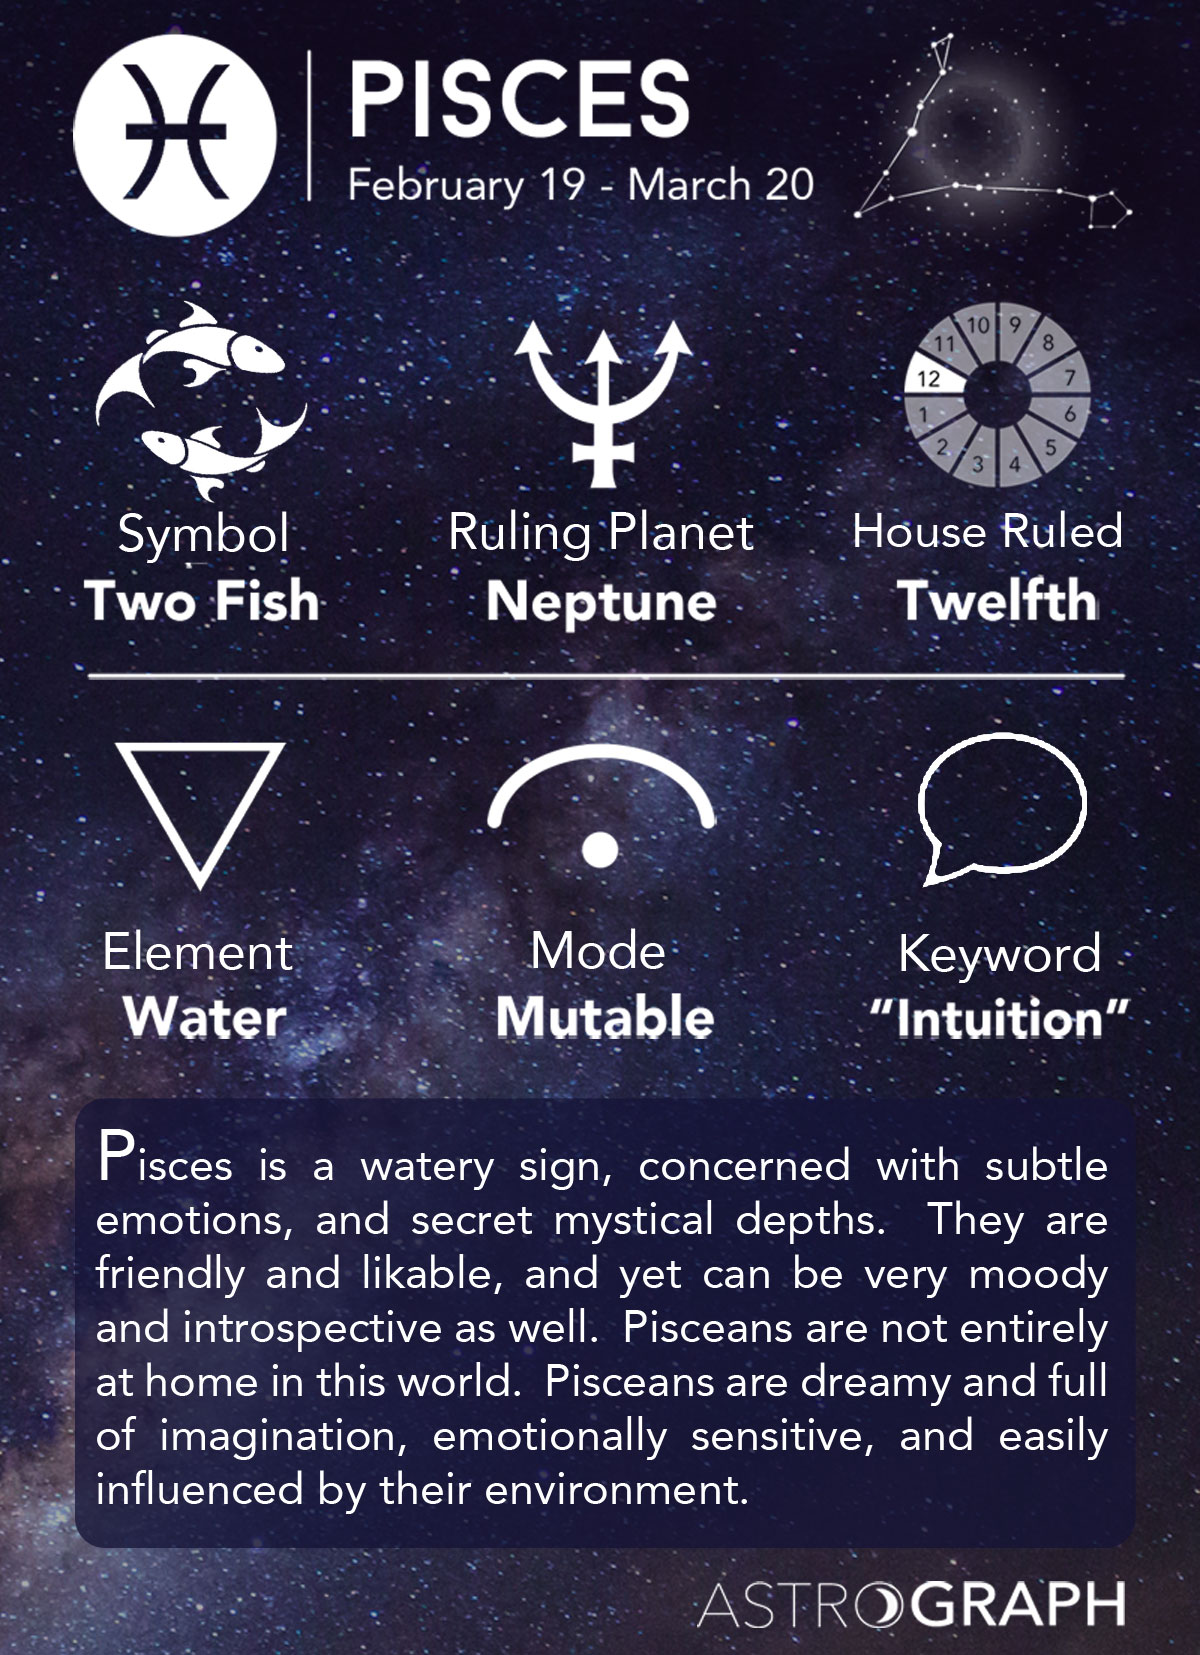 is pisces a star sign